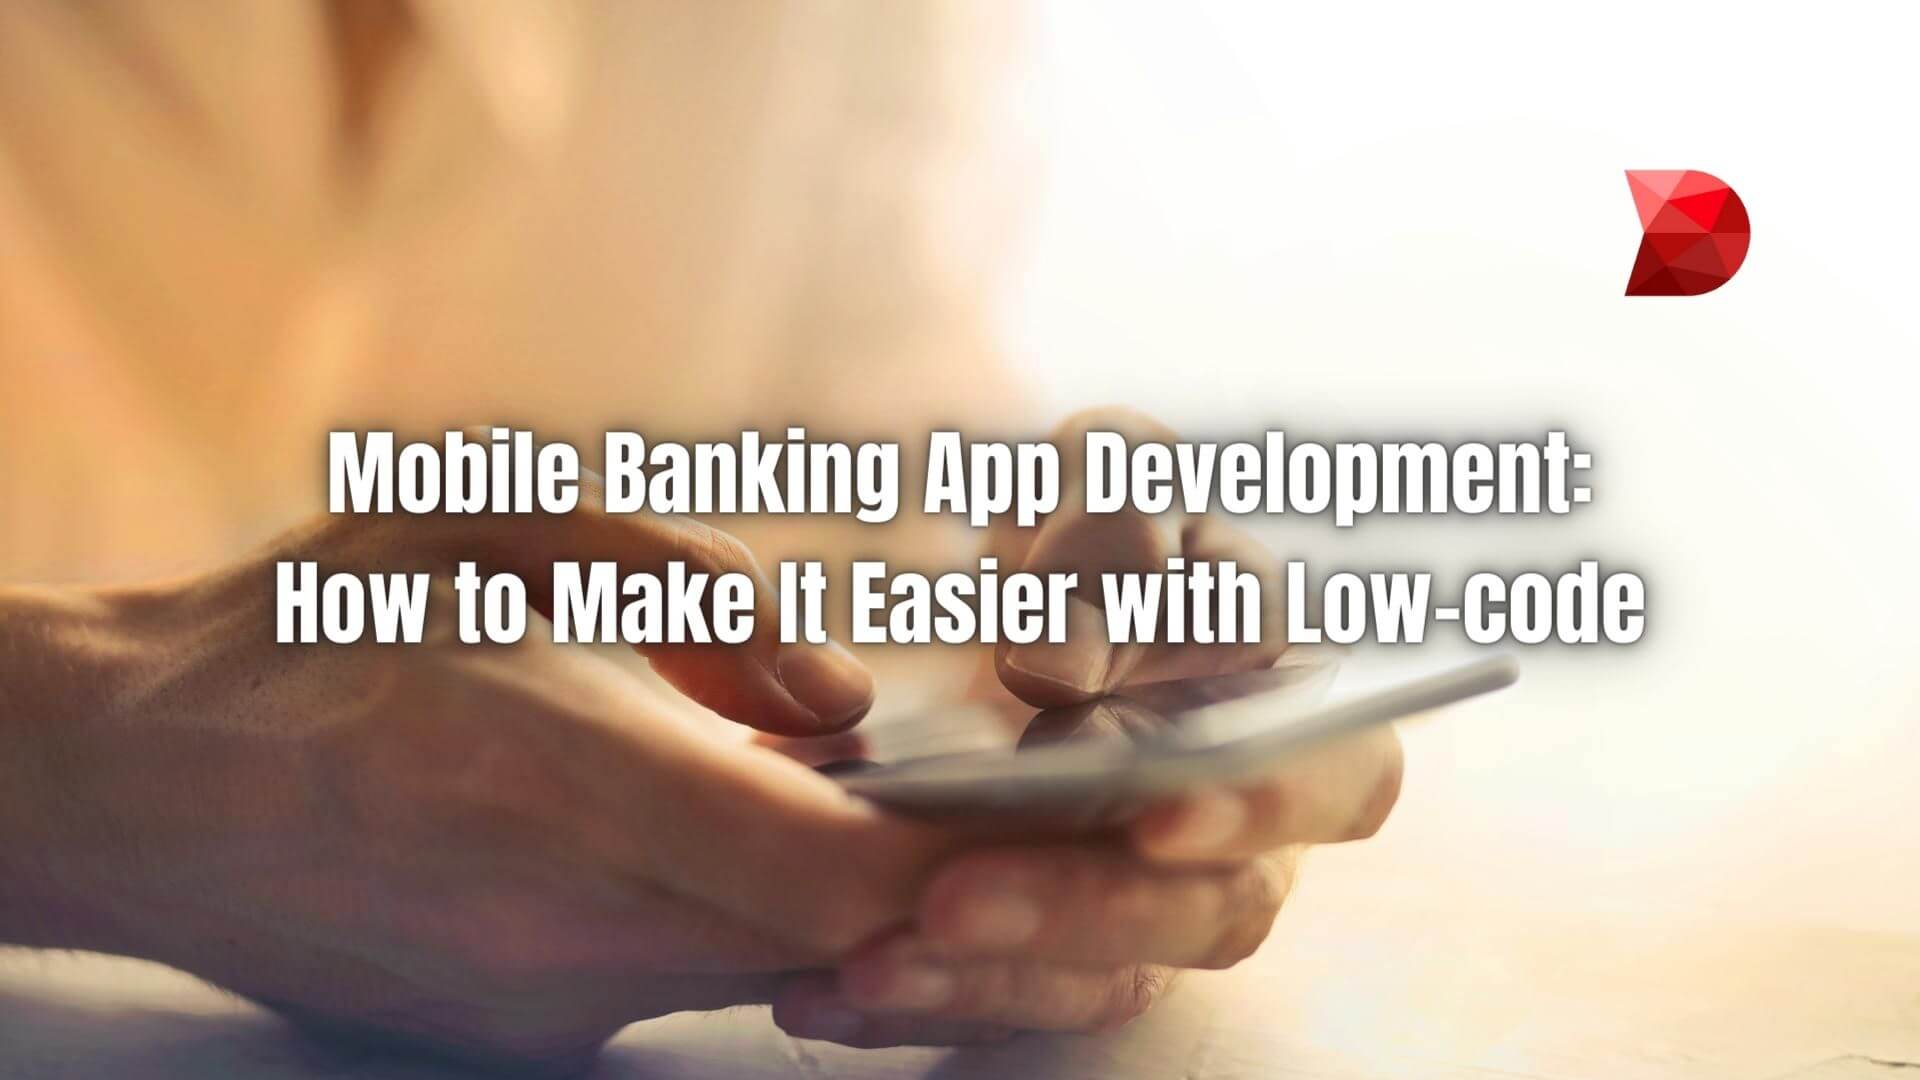 Unlock the secrets on how to develop mobile banking applications! Click here to learn how to streamline the process using low-code platforms.